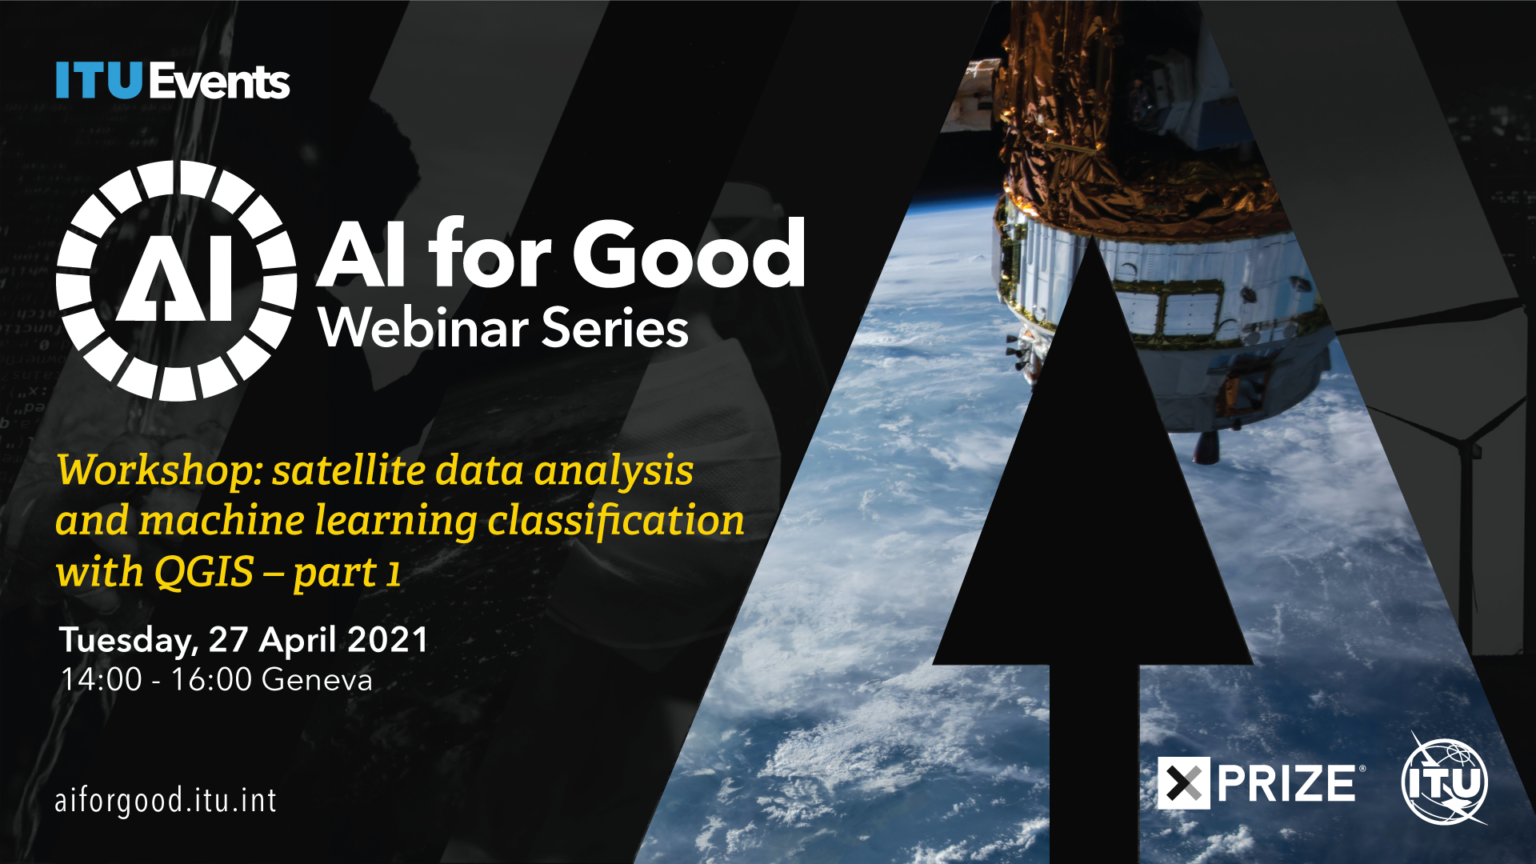 Workshop: Satellite Data Analysis and Machine Learning Classification with QGIS - Part 1